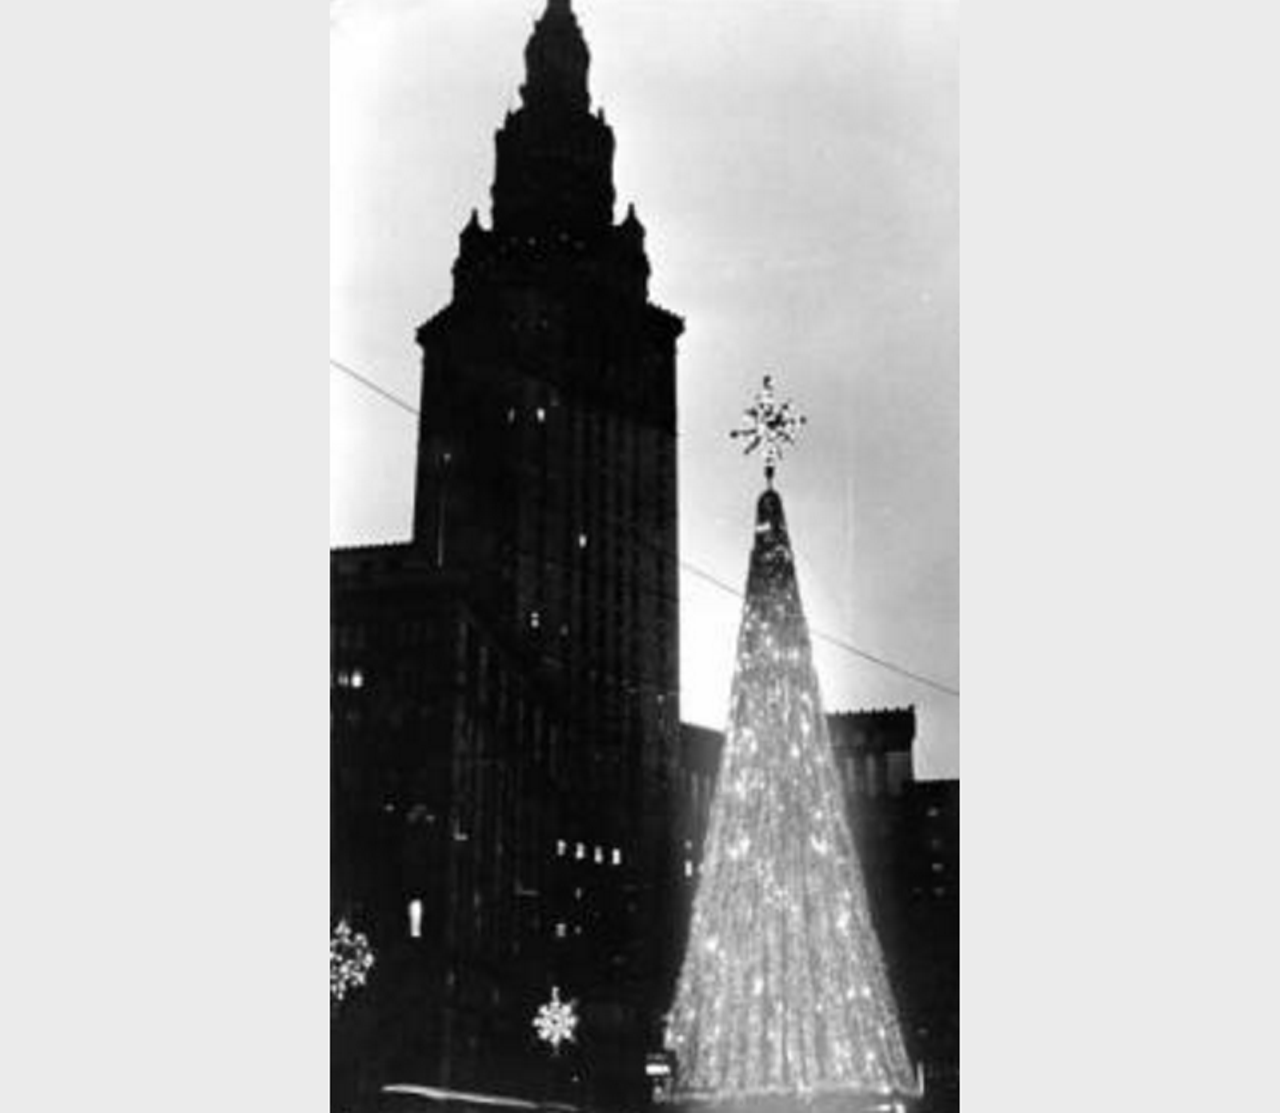 Christmas tree at Public Square, 1973.